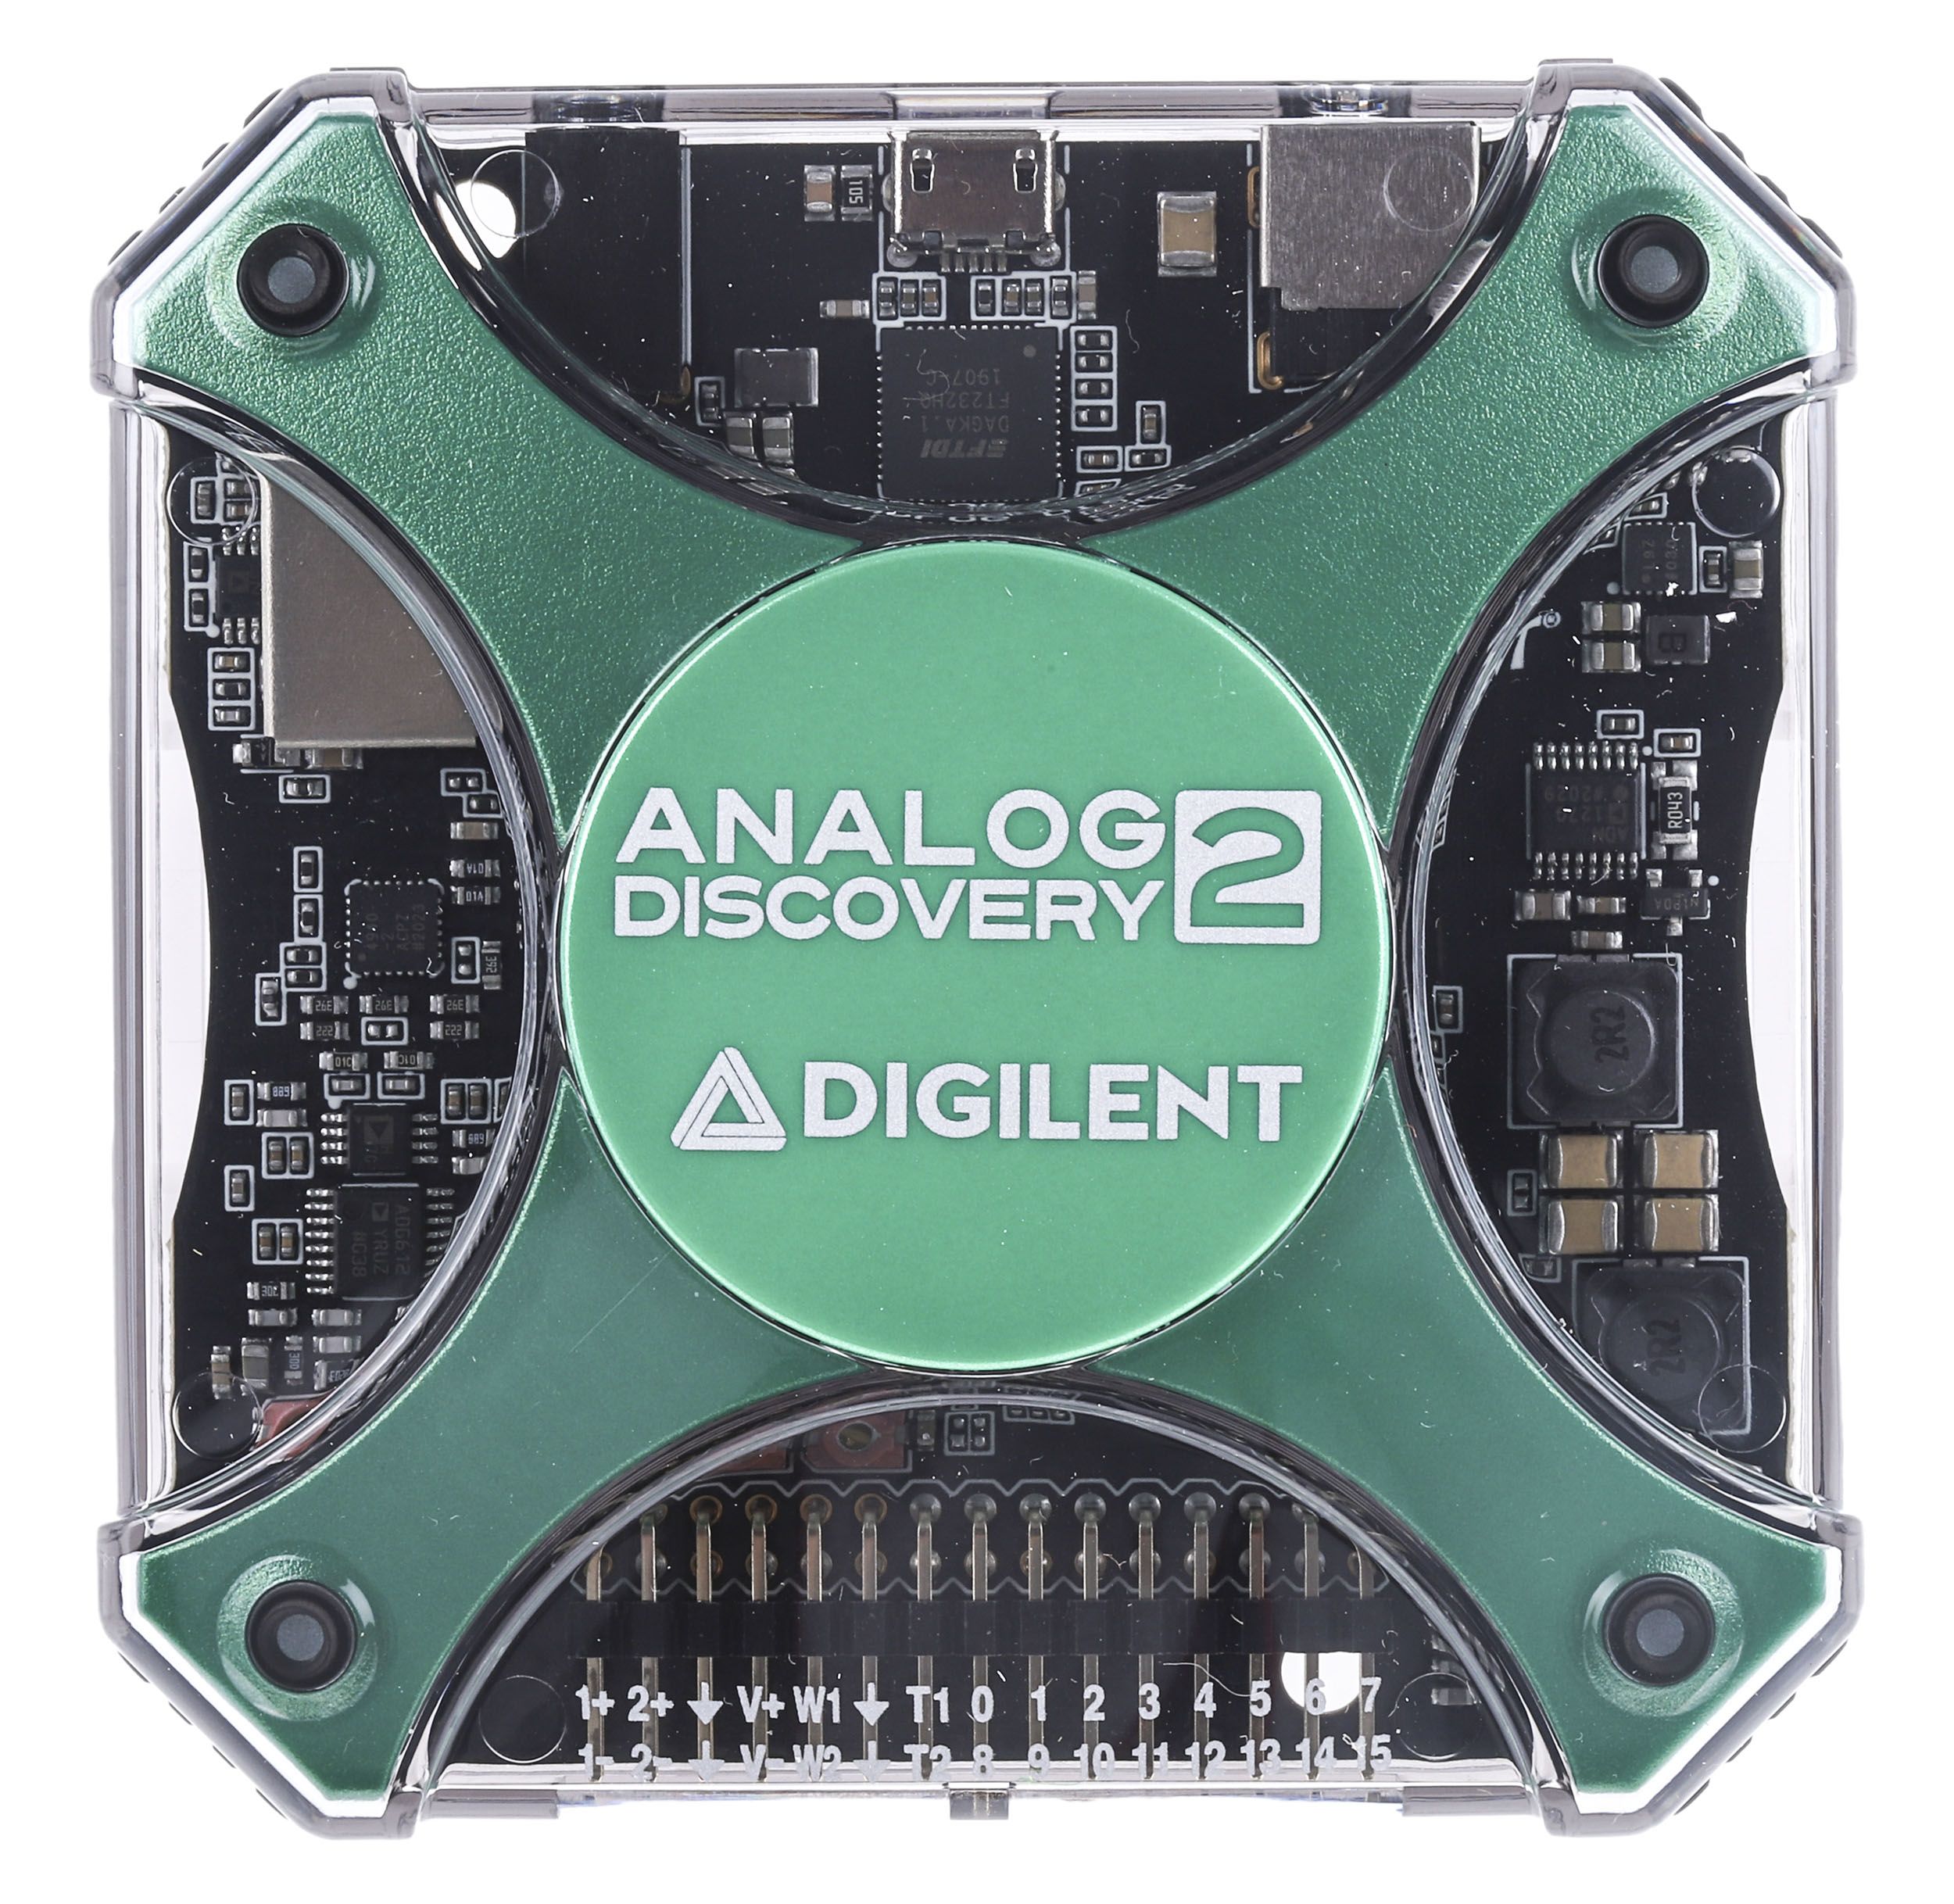 Digilent Analog Discovery 2 PC Based Oscilloscope, 30MHz, 2 Analogue Channels